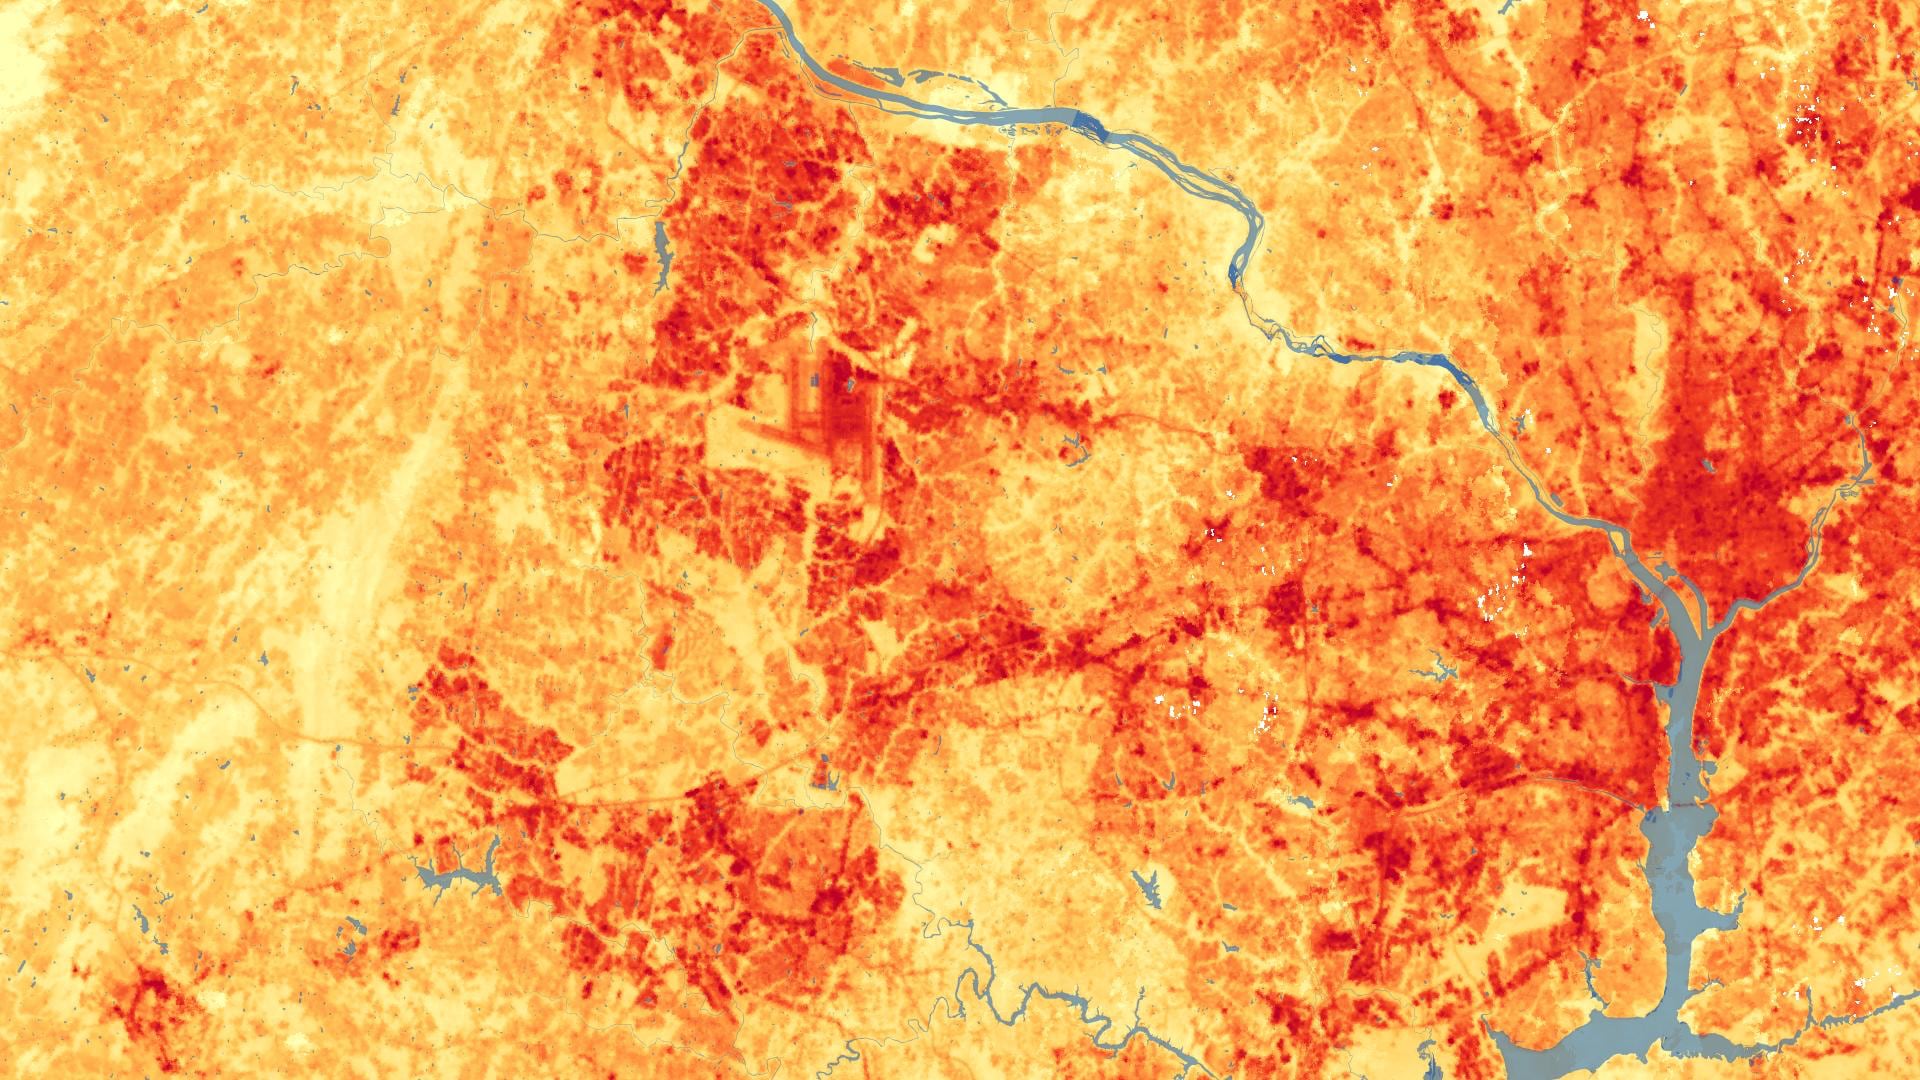 Average daytime land surface temperature for Fairfax County and surrounding areas calculated for the months June – August in the years 2013 – 2020 from the Landsat 8 Provisional surface Temperature product in the USGS Analysis Ready Data product bundle. Lighter yellow tones represent cooler temperatures while saturated reds indicate hotter temperatures, ranging from 64 °F in less built areas to 123 °F in the most urbanized areas where partners should concentrate mitigation strategies.  Keywords: Urban Heat, Landsat 8, Land Surface Temperature